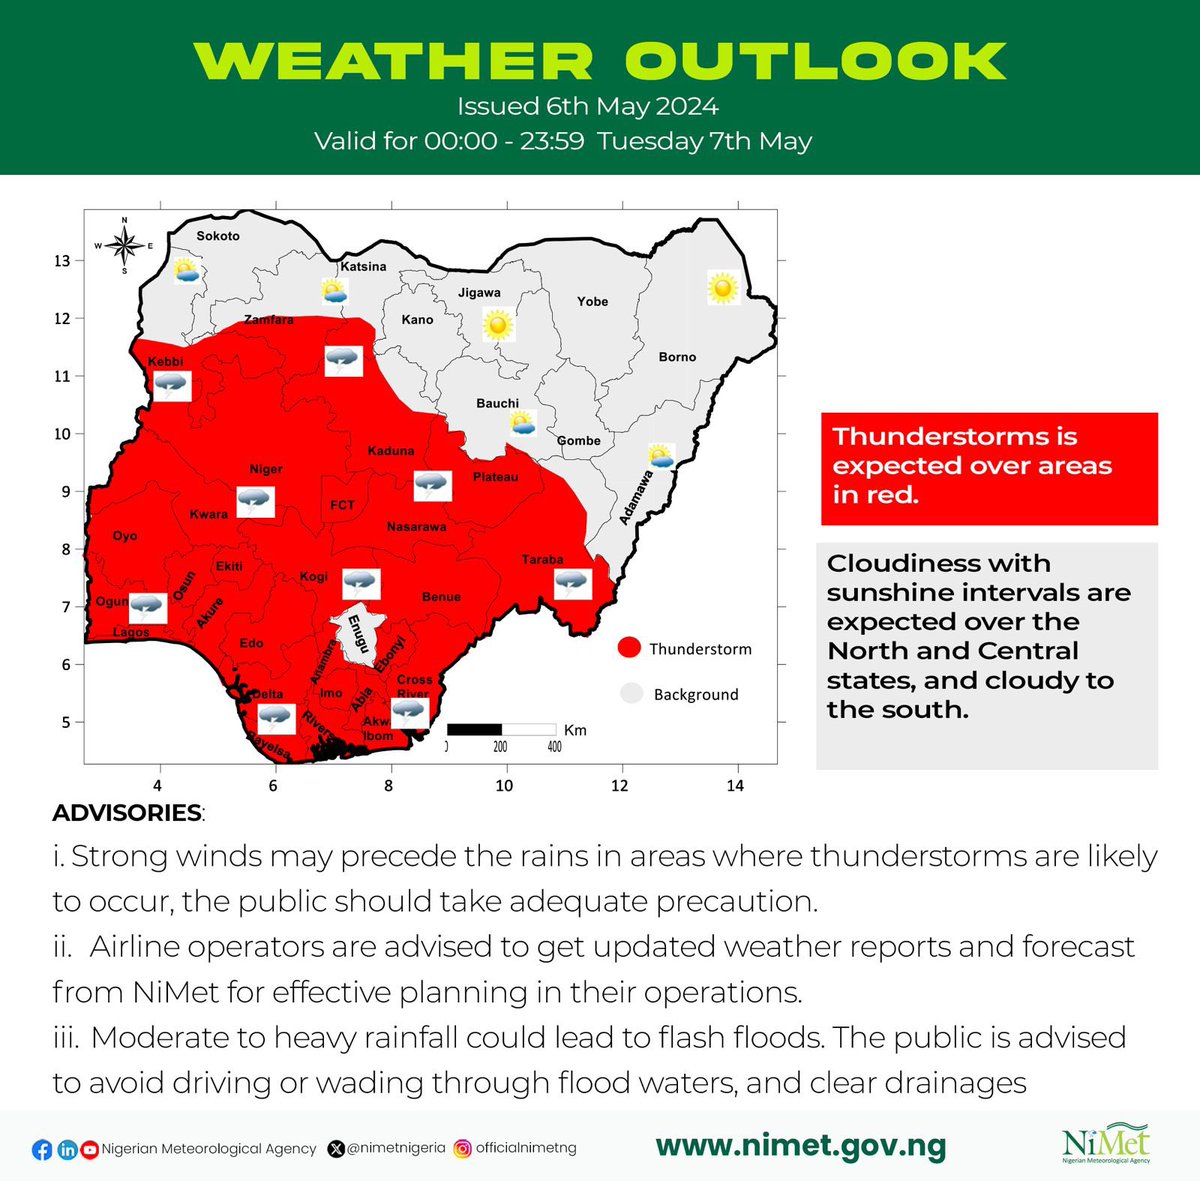 Weather Outlook issued 6th Valid 00:00 - 23:59 Tuesday 7th May

Visit: youtu.be/uieDZ1jN1jg?si…
To watch weather forecast video 

#beweatheraware #nigerianweather #thunderstorms #cloudiness #cloudy #sunny #climatechange #flashfloods